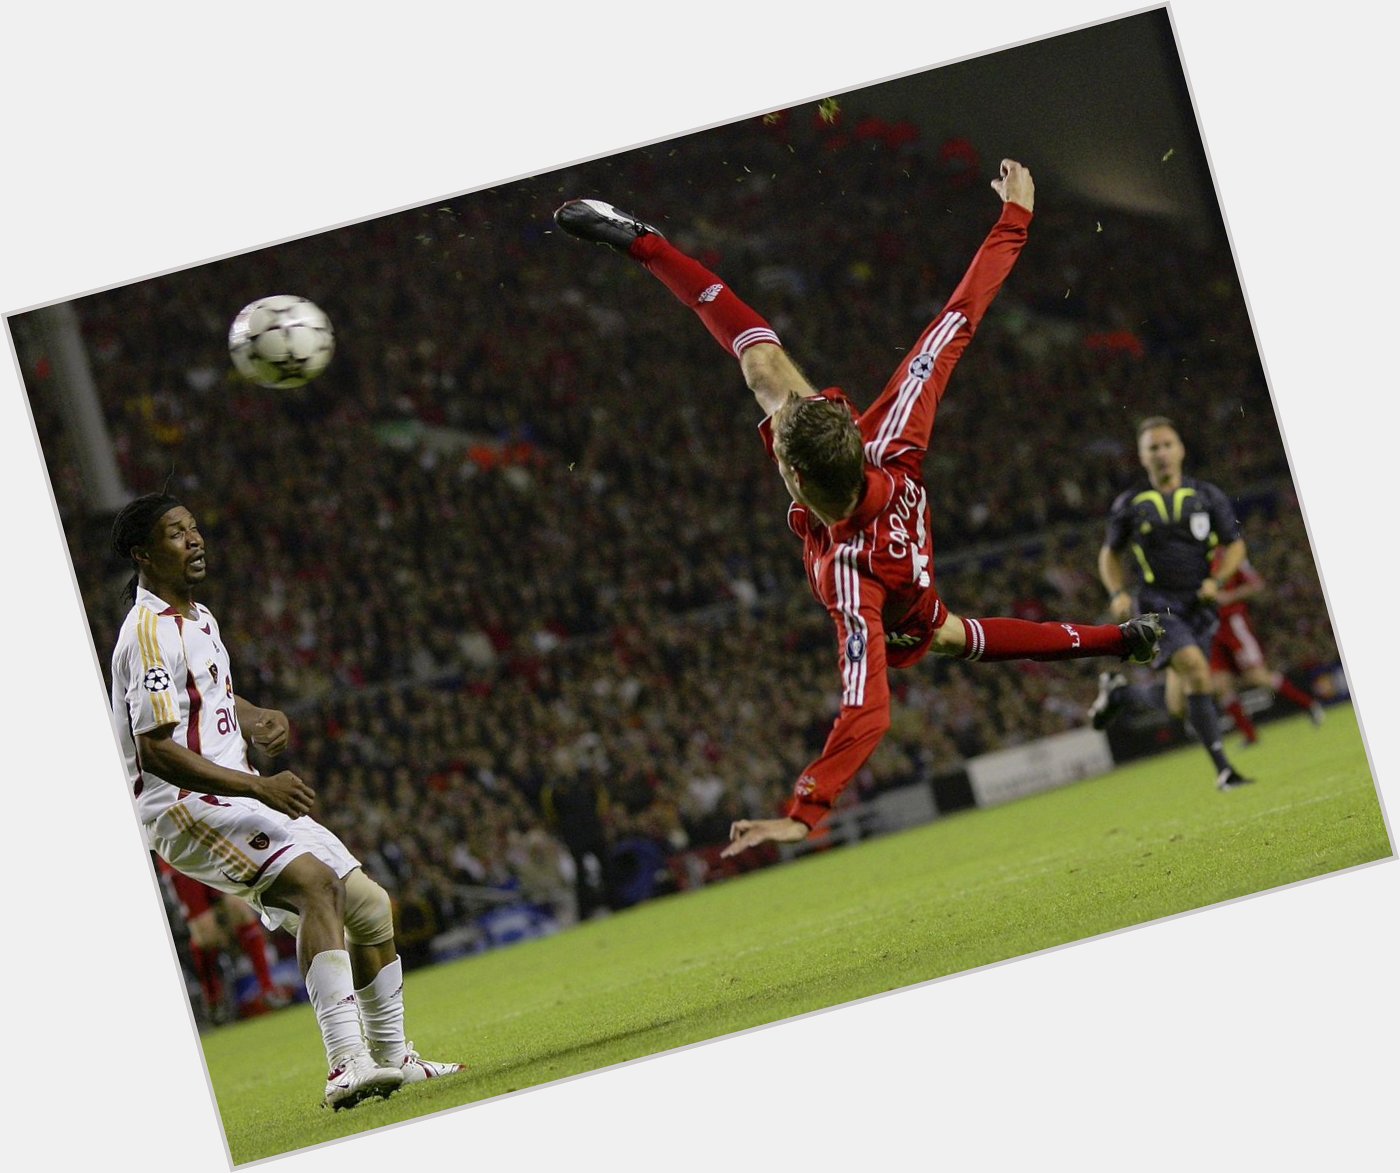 He\s big,
He\s red,
His feet stick out the bed,
Peter Crouch, Peter Crouch...

Happy birthday  